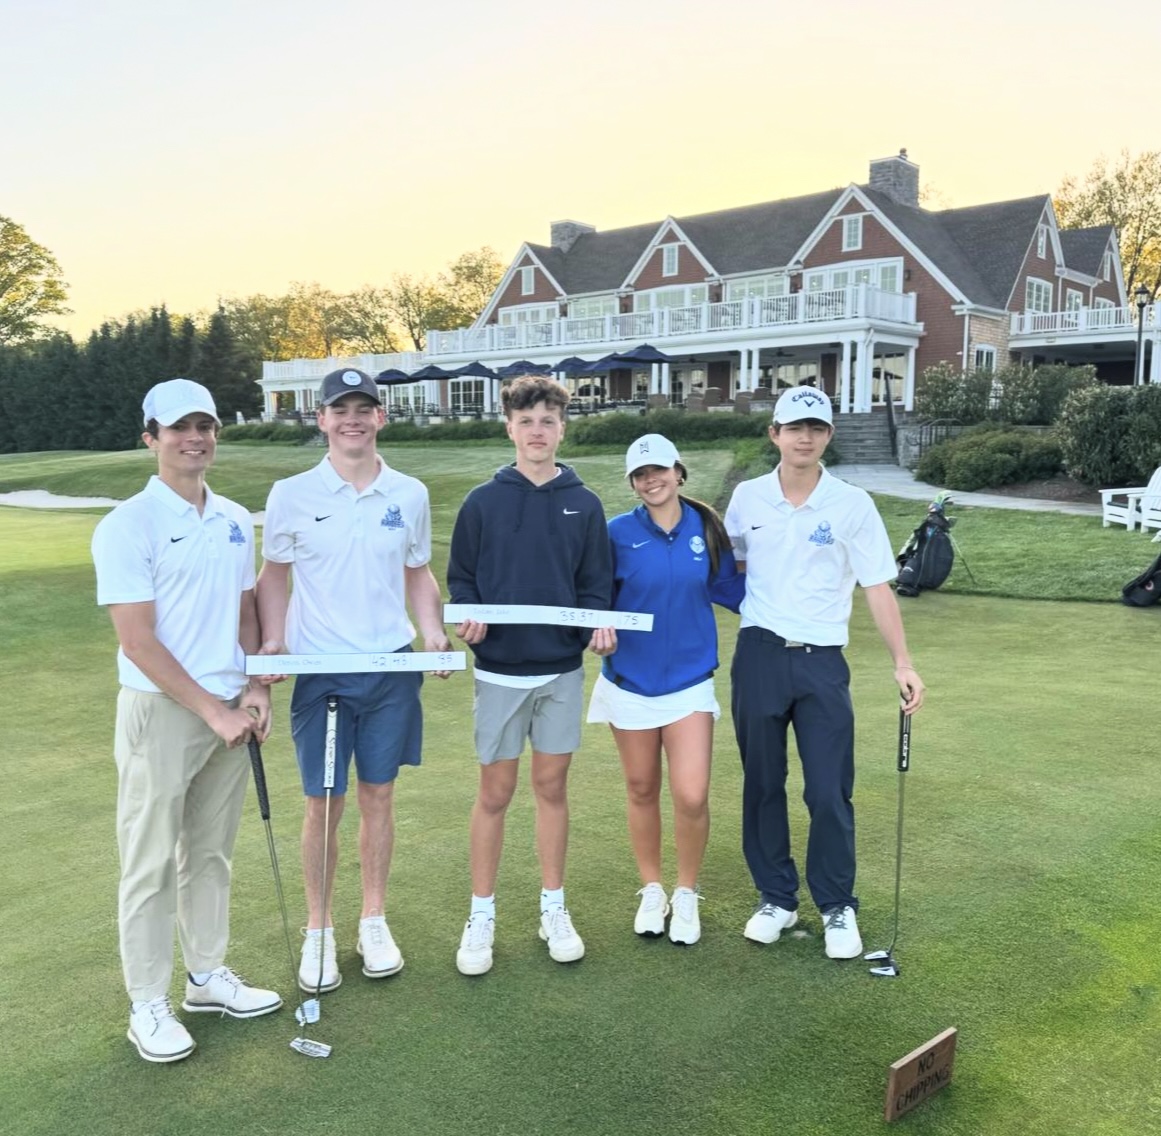 The+Scotch+Plains-Fanwood+high+school+golf+team+poses+for+a+picture+after+the+Union+County+Championship+on+Wednesday%2C+May+1.+The+team+earned+fifth+place+as+Todaro+finished+third+overall.